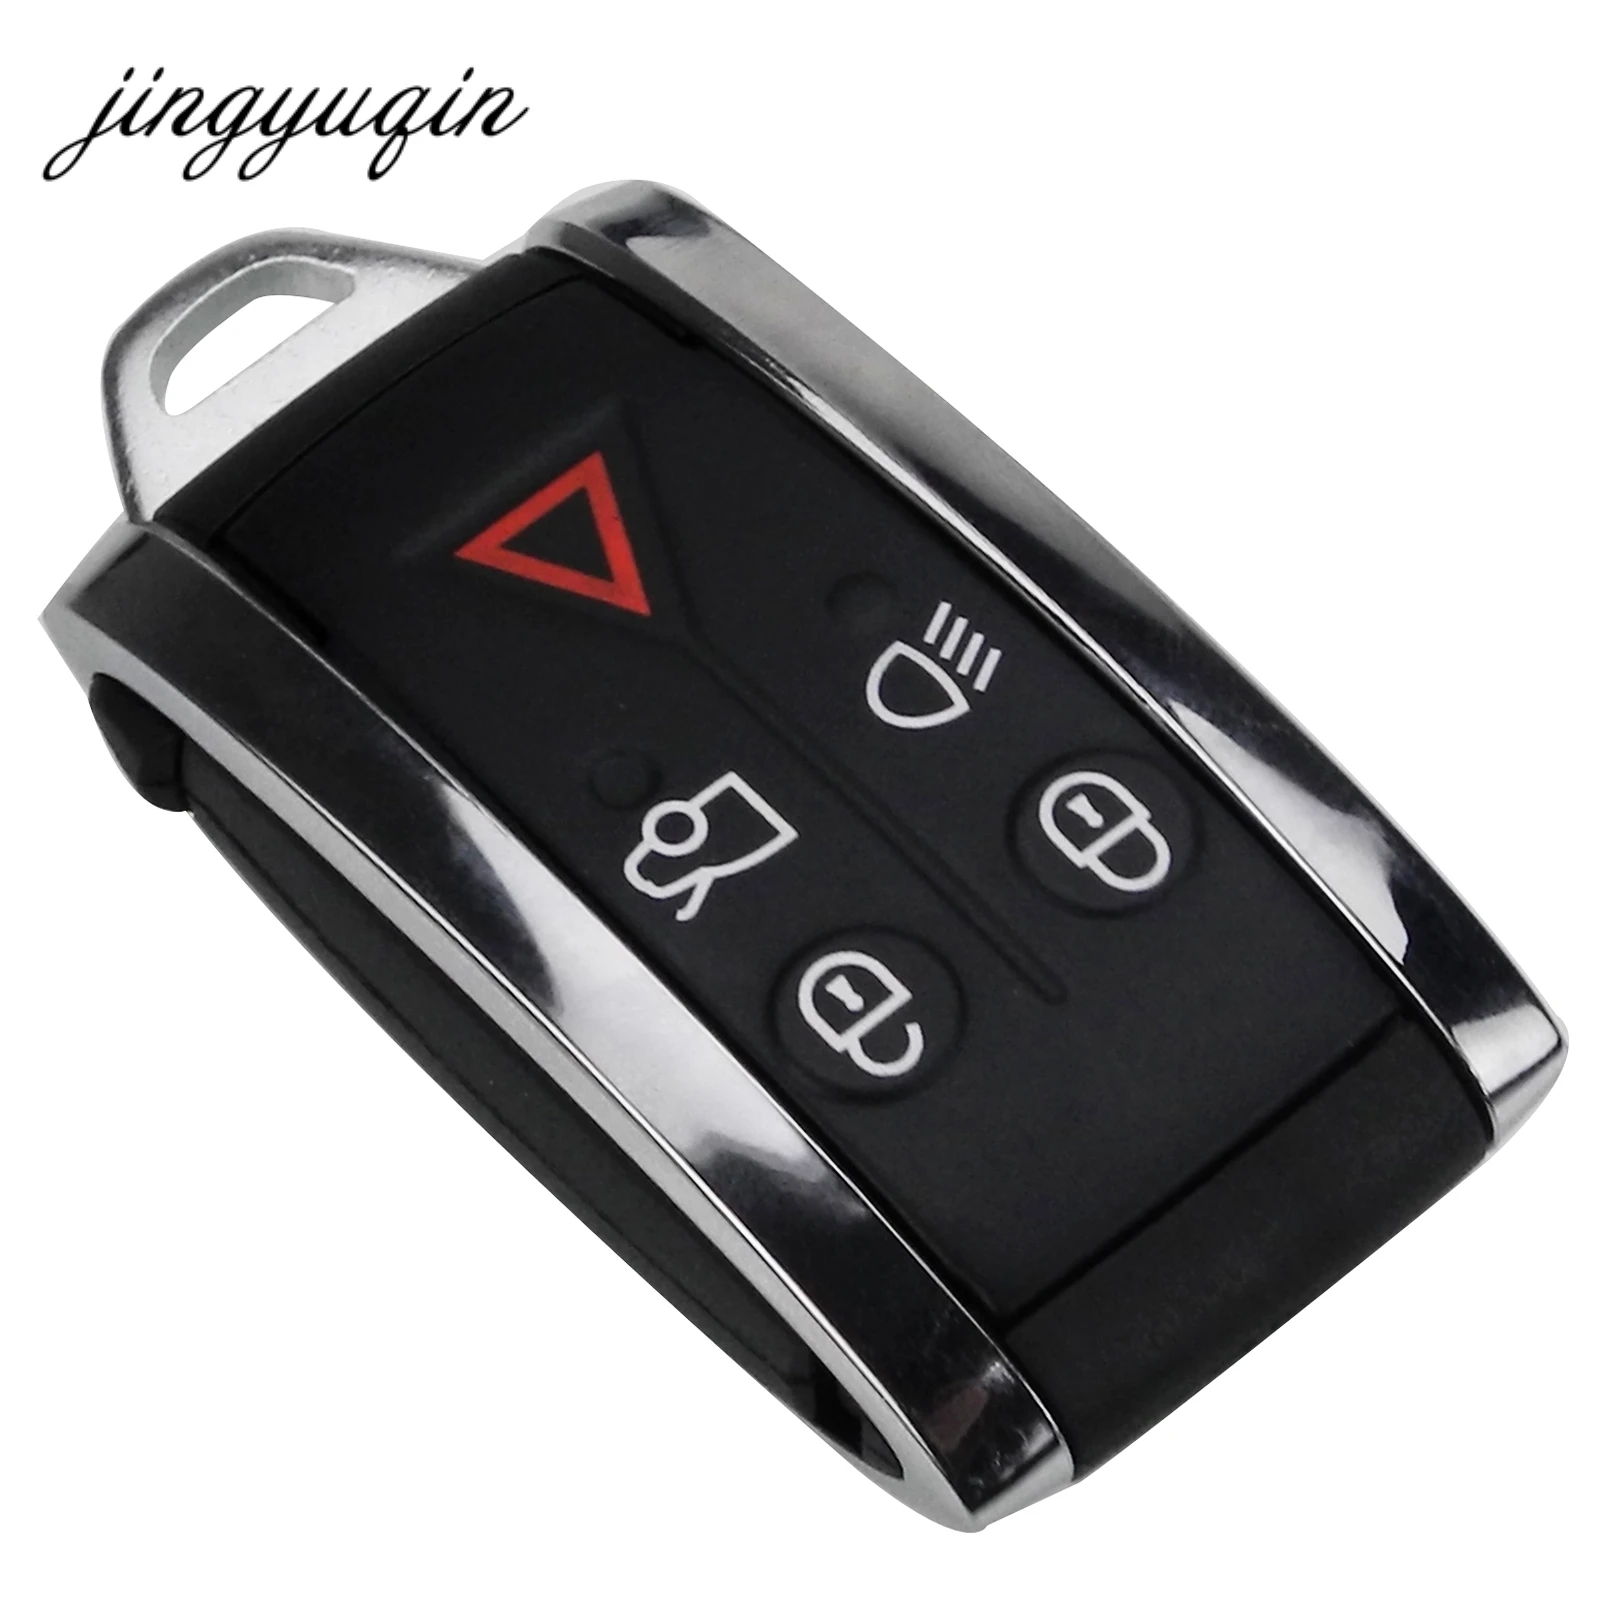 jingyuqin 5 Buttons Key Fob Shell For Jaguar X XF XK XKR New Remote Smart Prox Case Housing + Blade Replacement